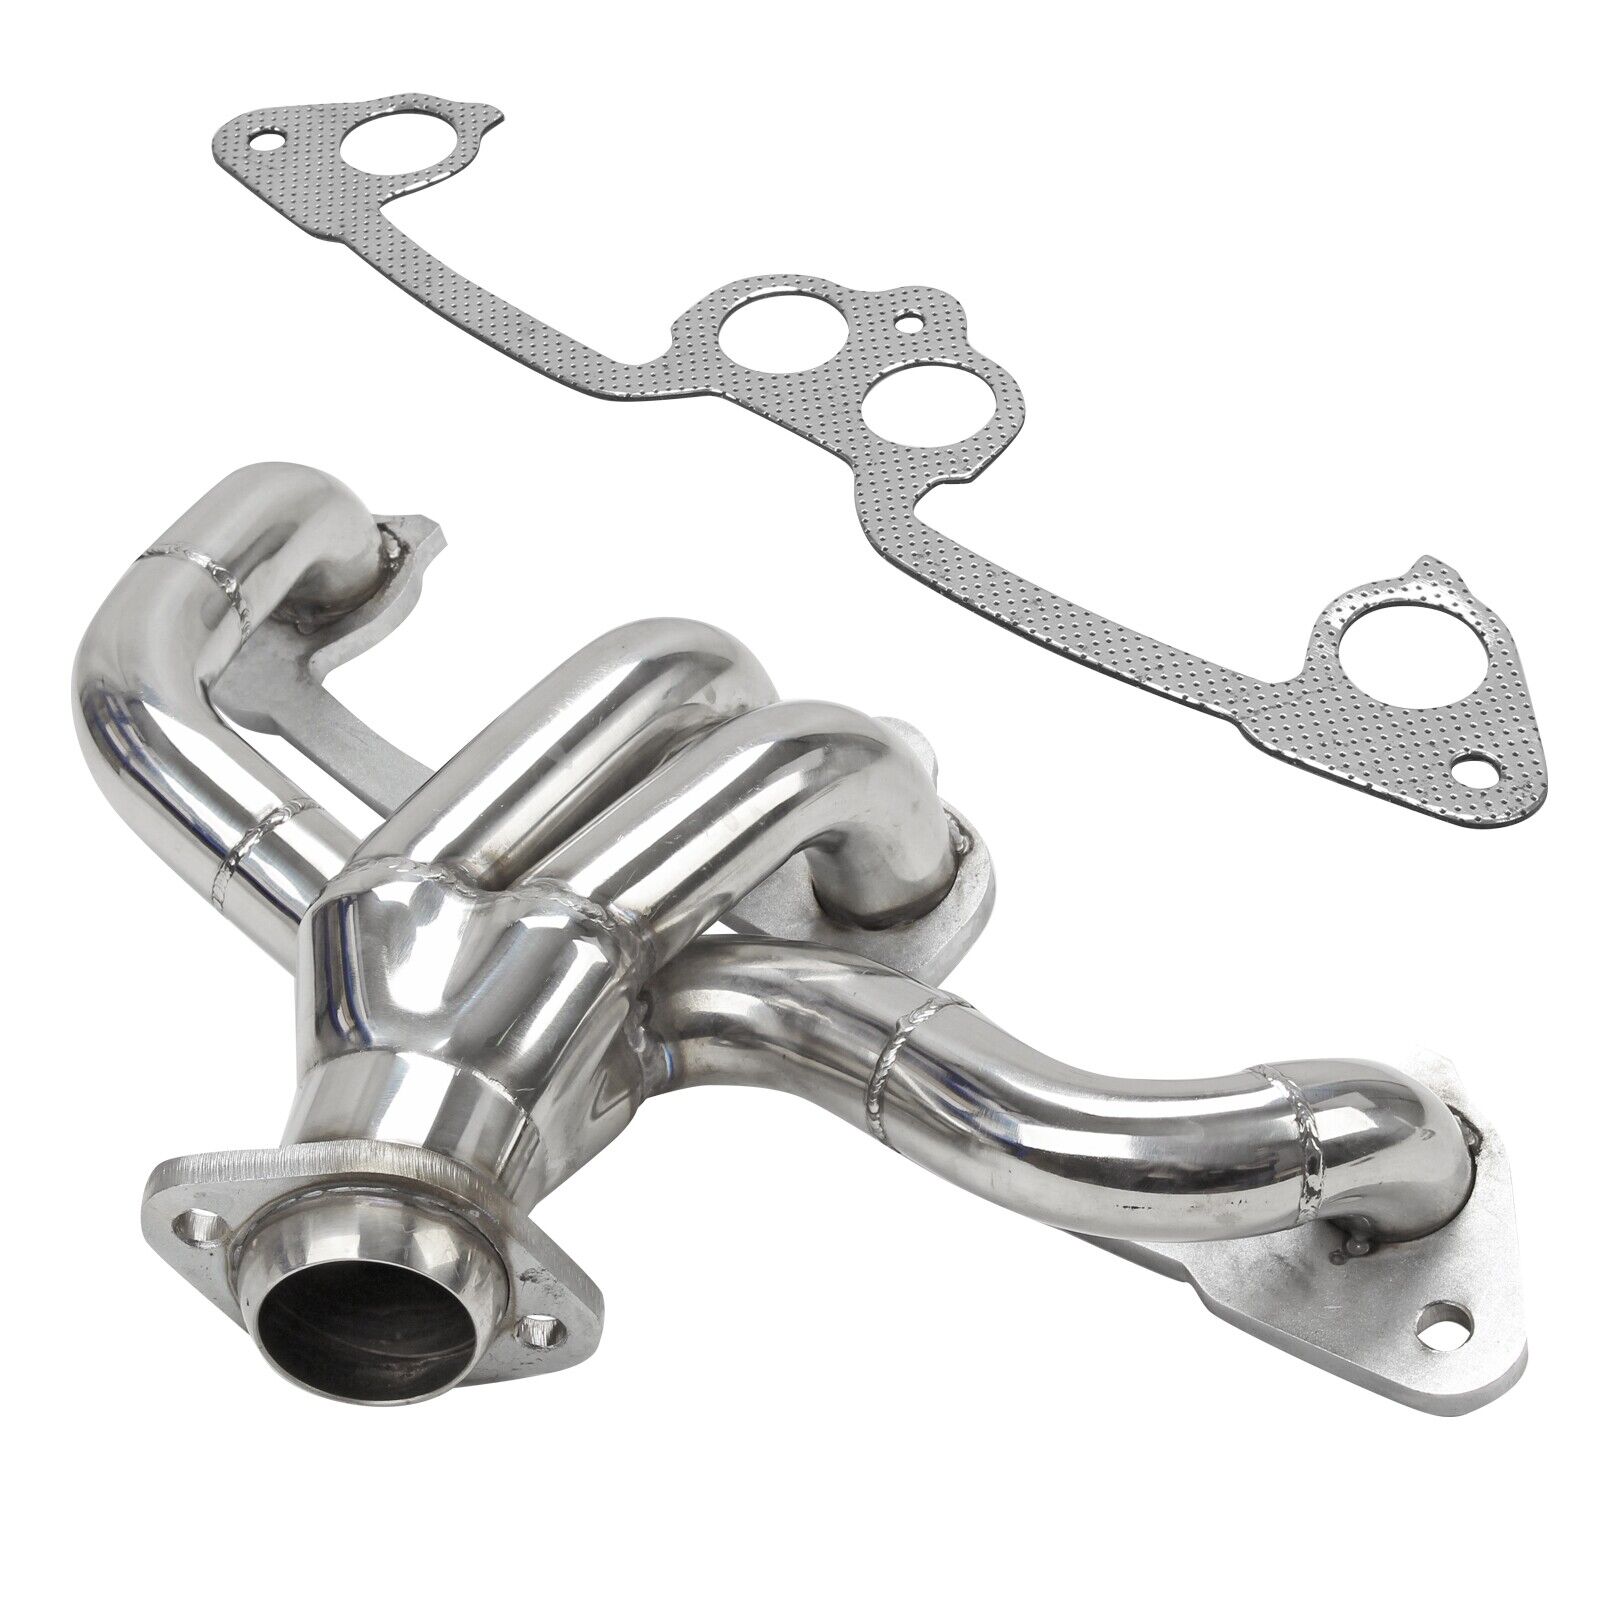 FOR 1991-2002 Jeep Wrangler 2.5L L4 Stainless Steel Manifold Header w/ Gasket